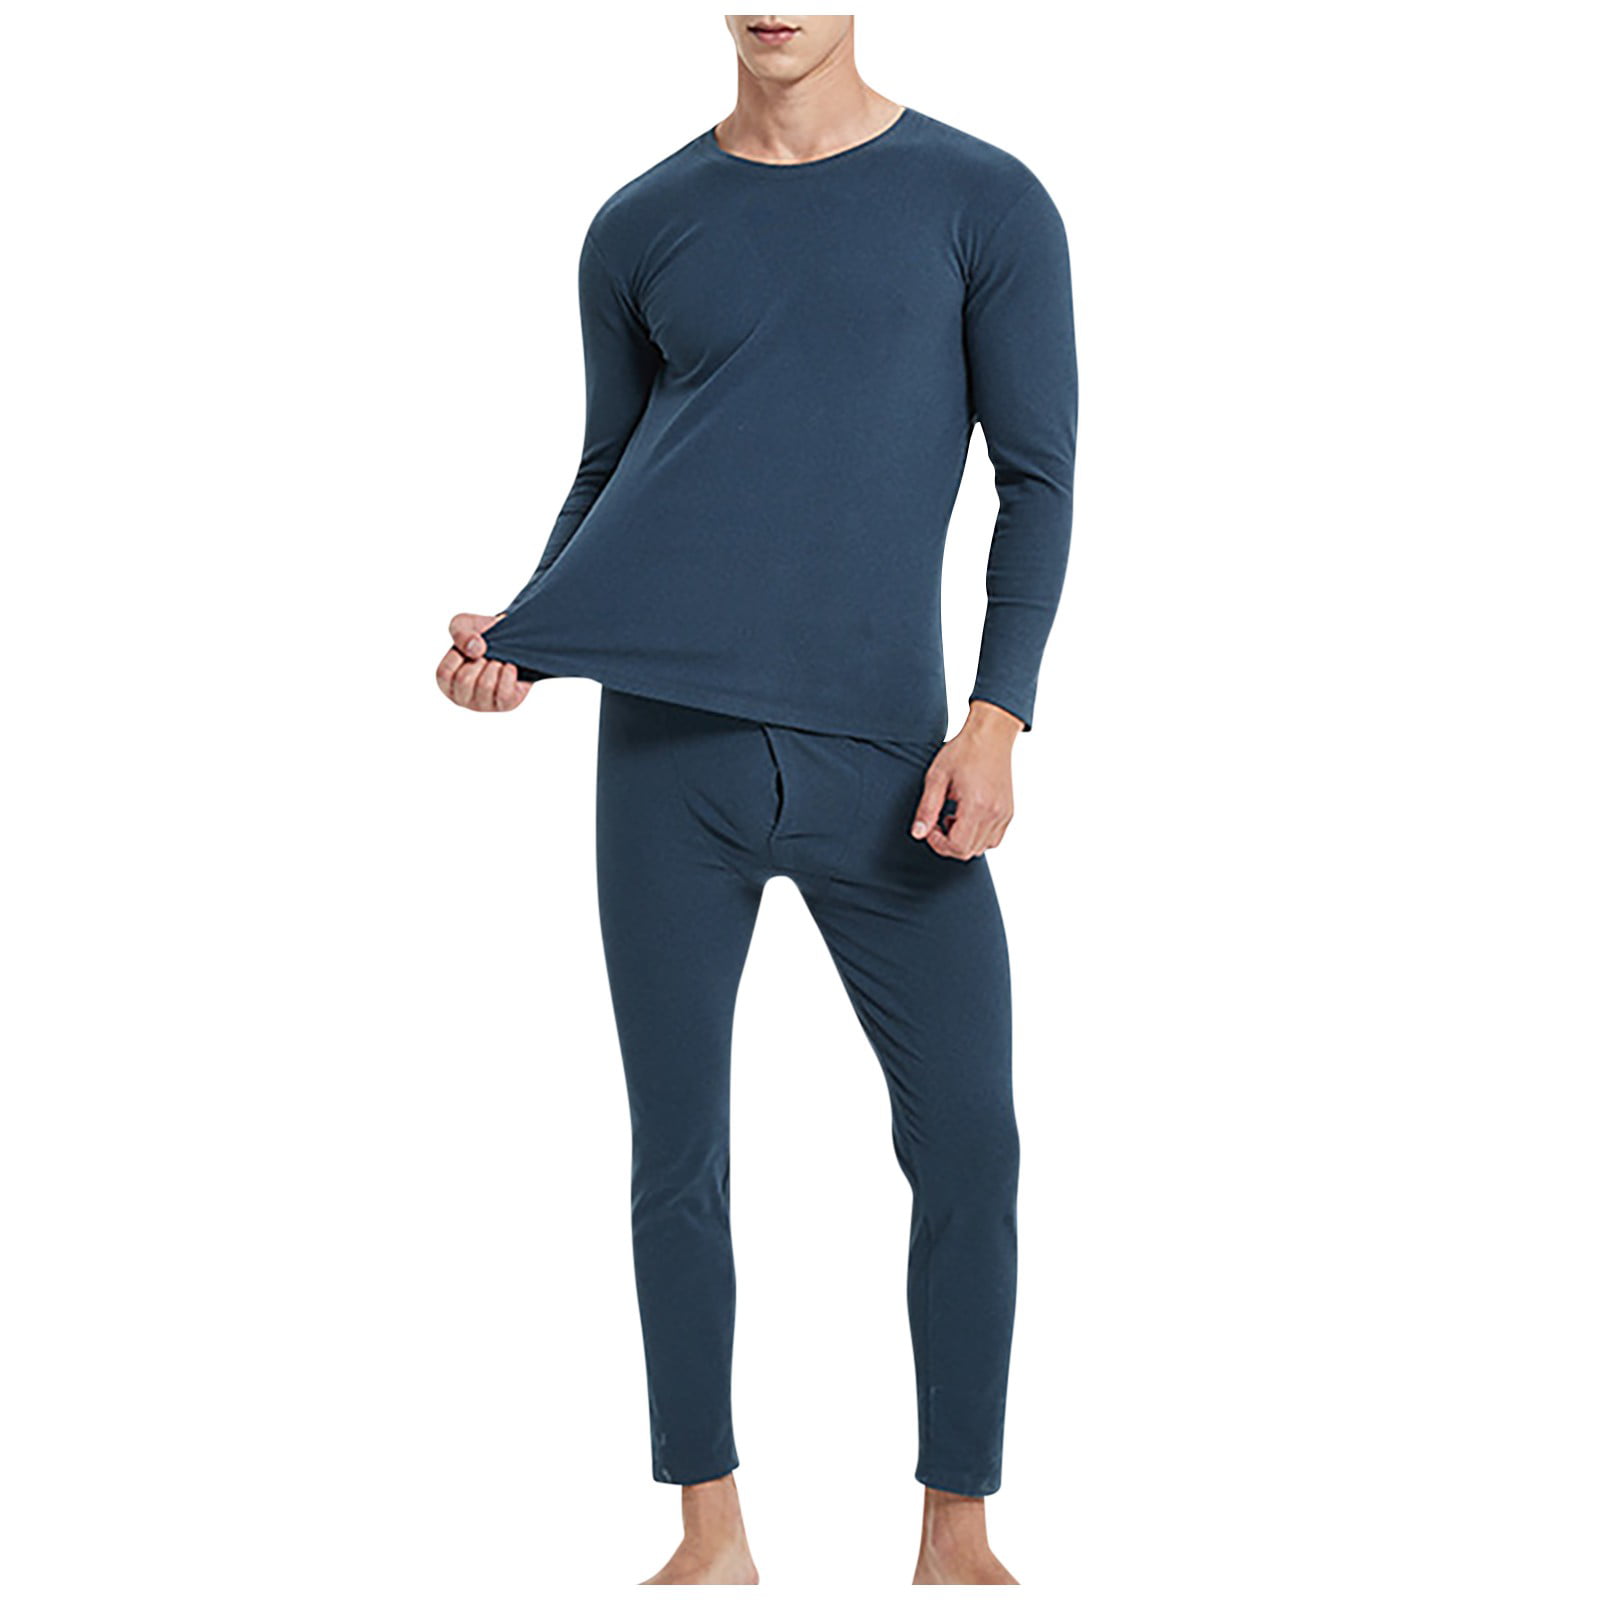 Men's Oh So Soft Luxe Layering Thermal Underwear Leggings